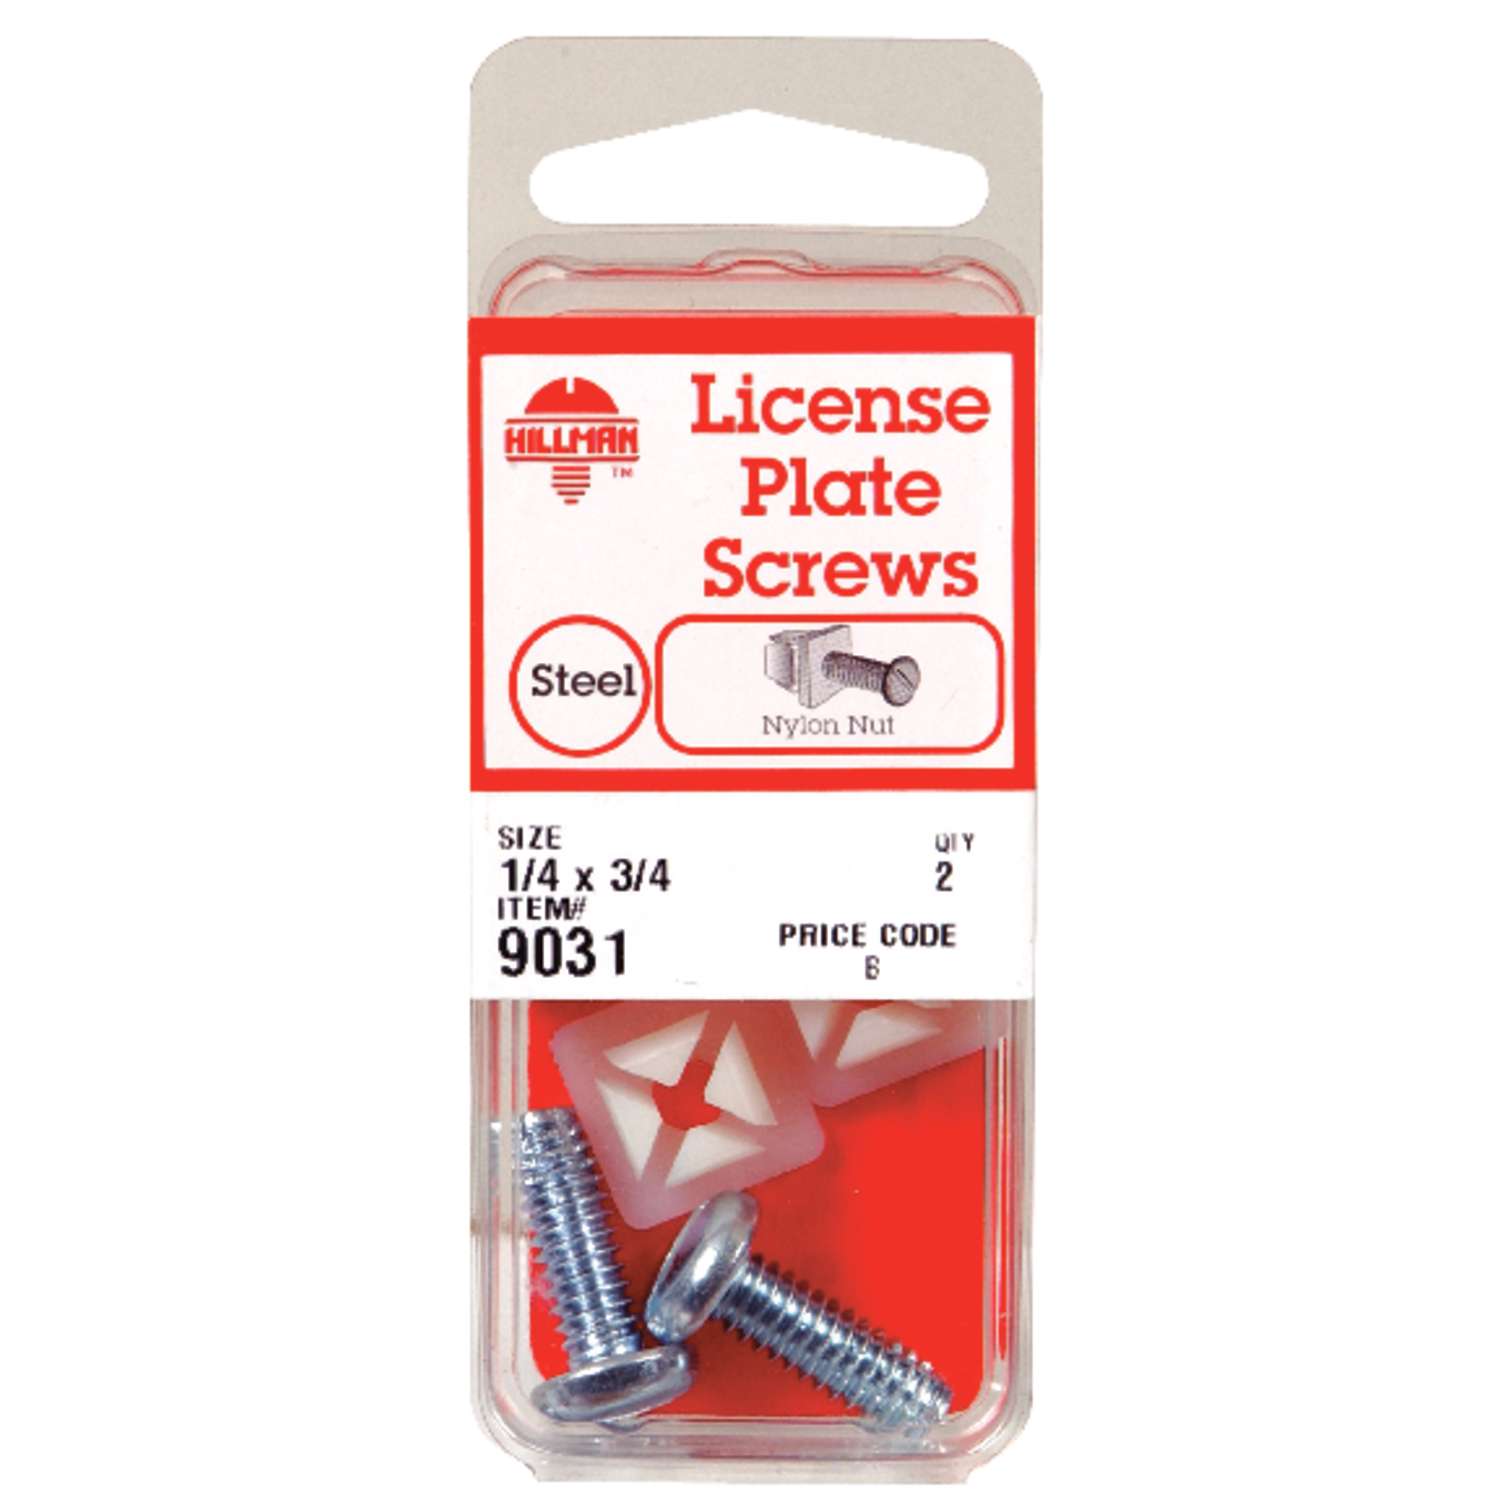 Hillman No. 14 X 3/4 in. L Slotted Square Head License Plate Screws pk  Ace Hardware